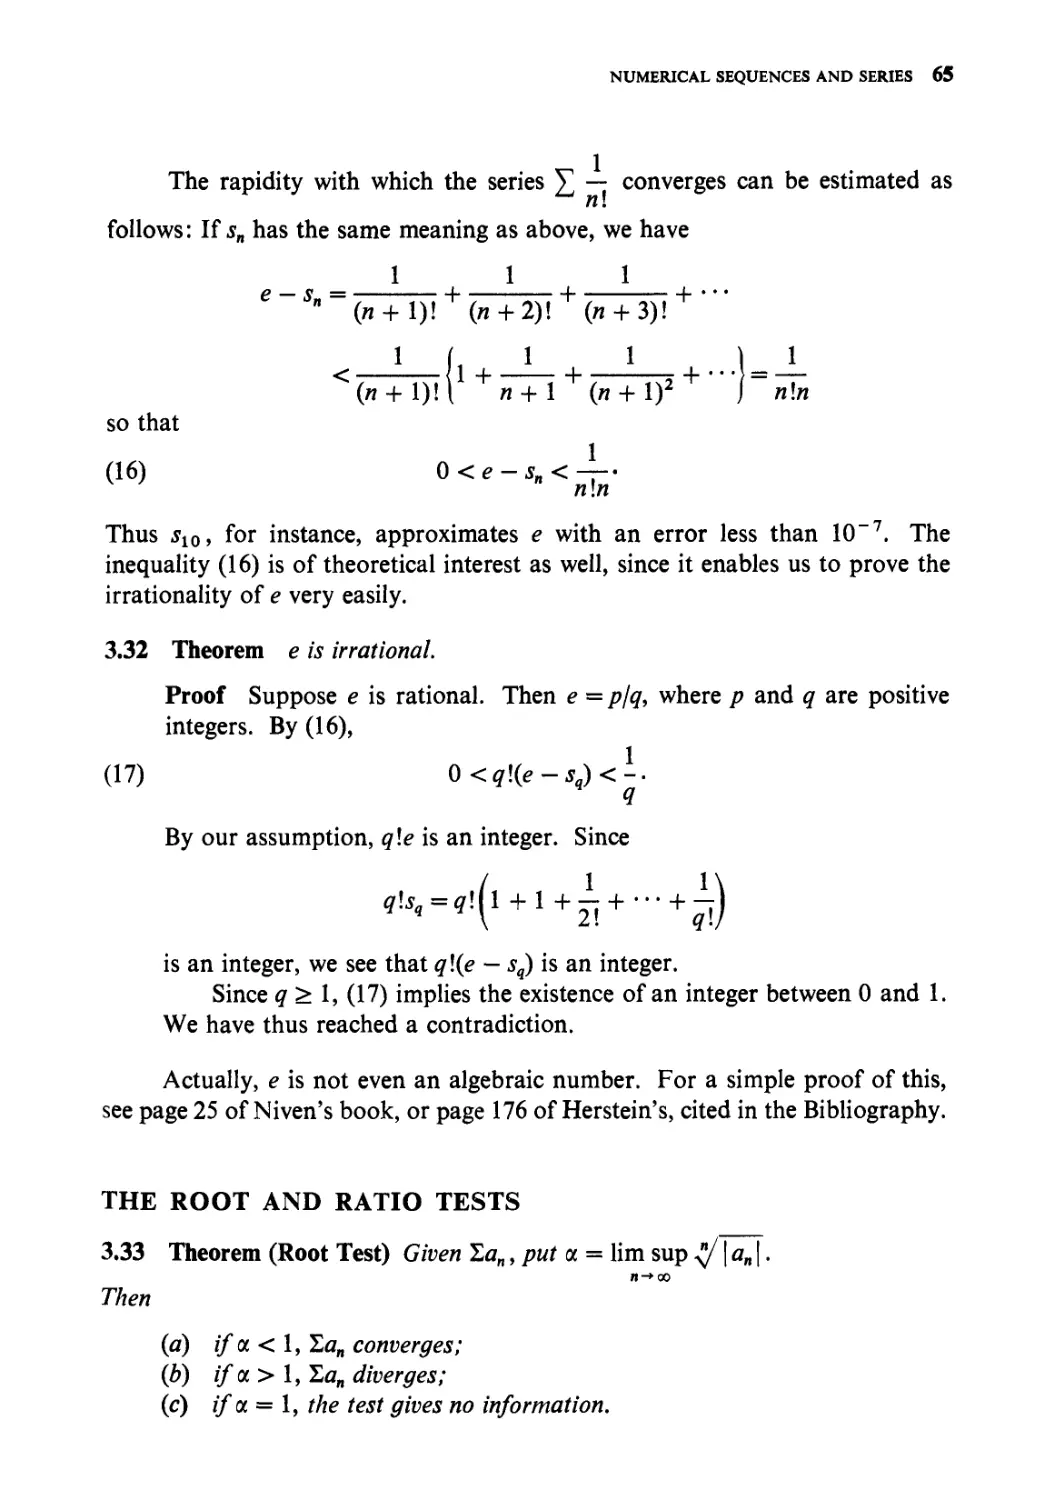 The root and ratio tests